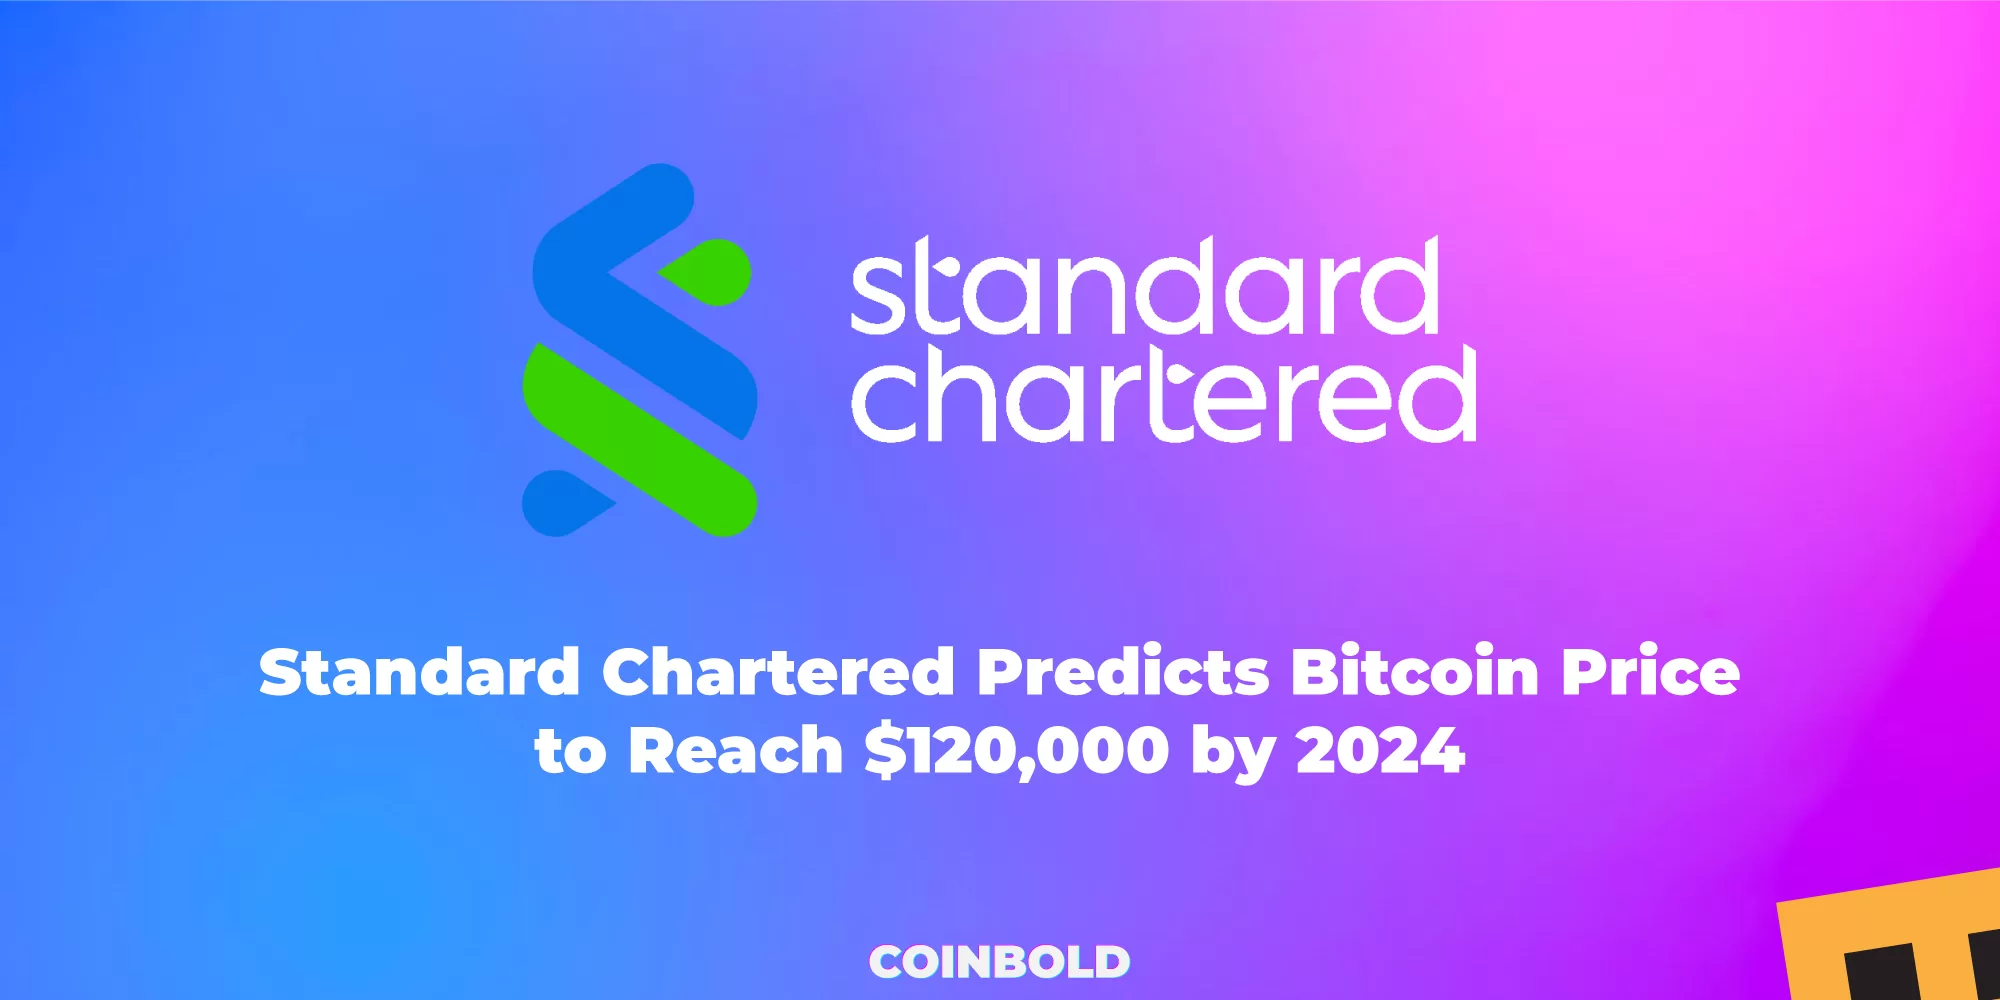 Standard Chartered Predicts Bitcoin Price to Reach $120,000 by 2024